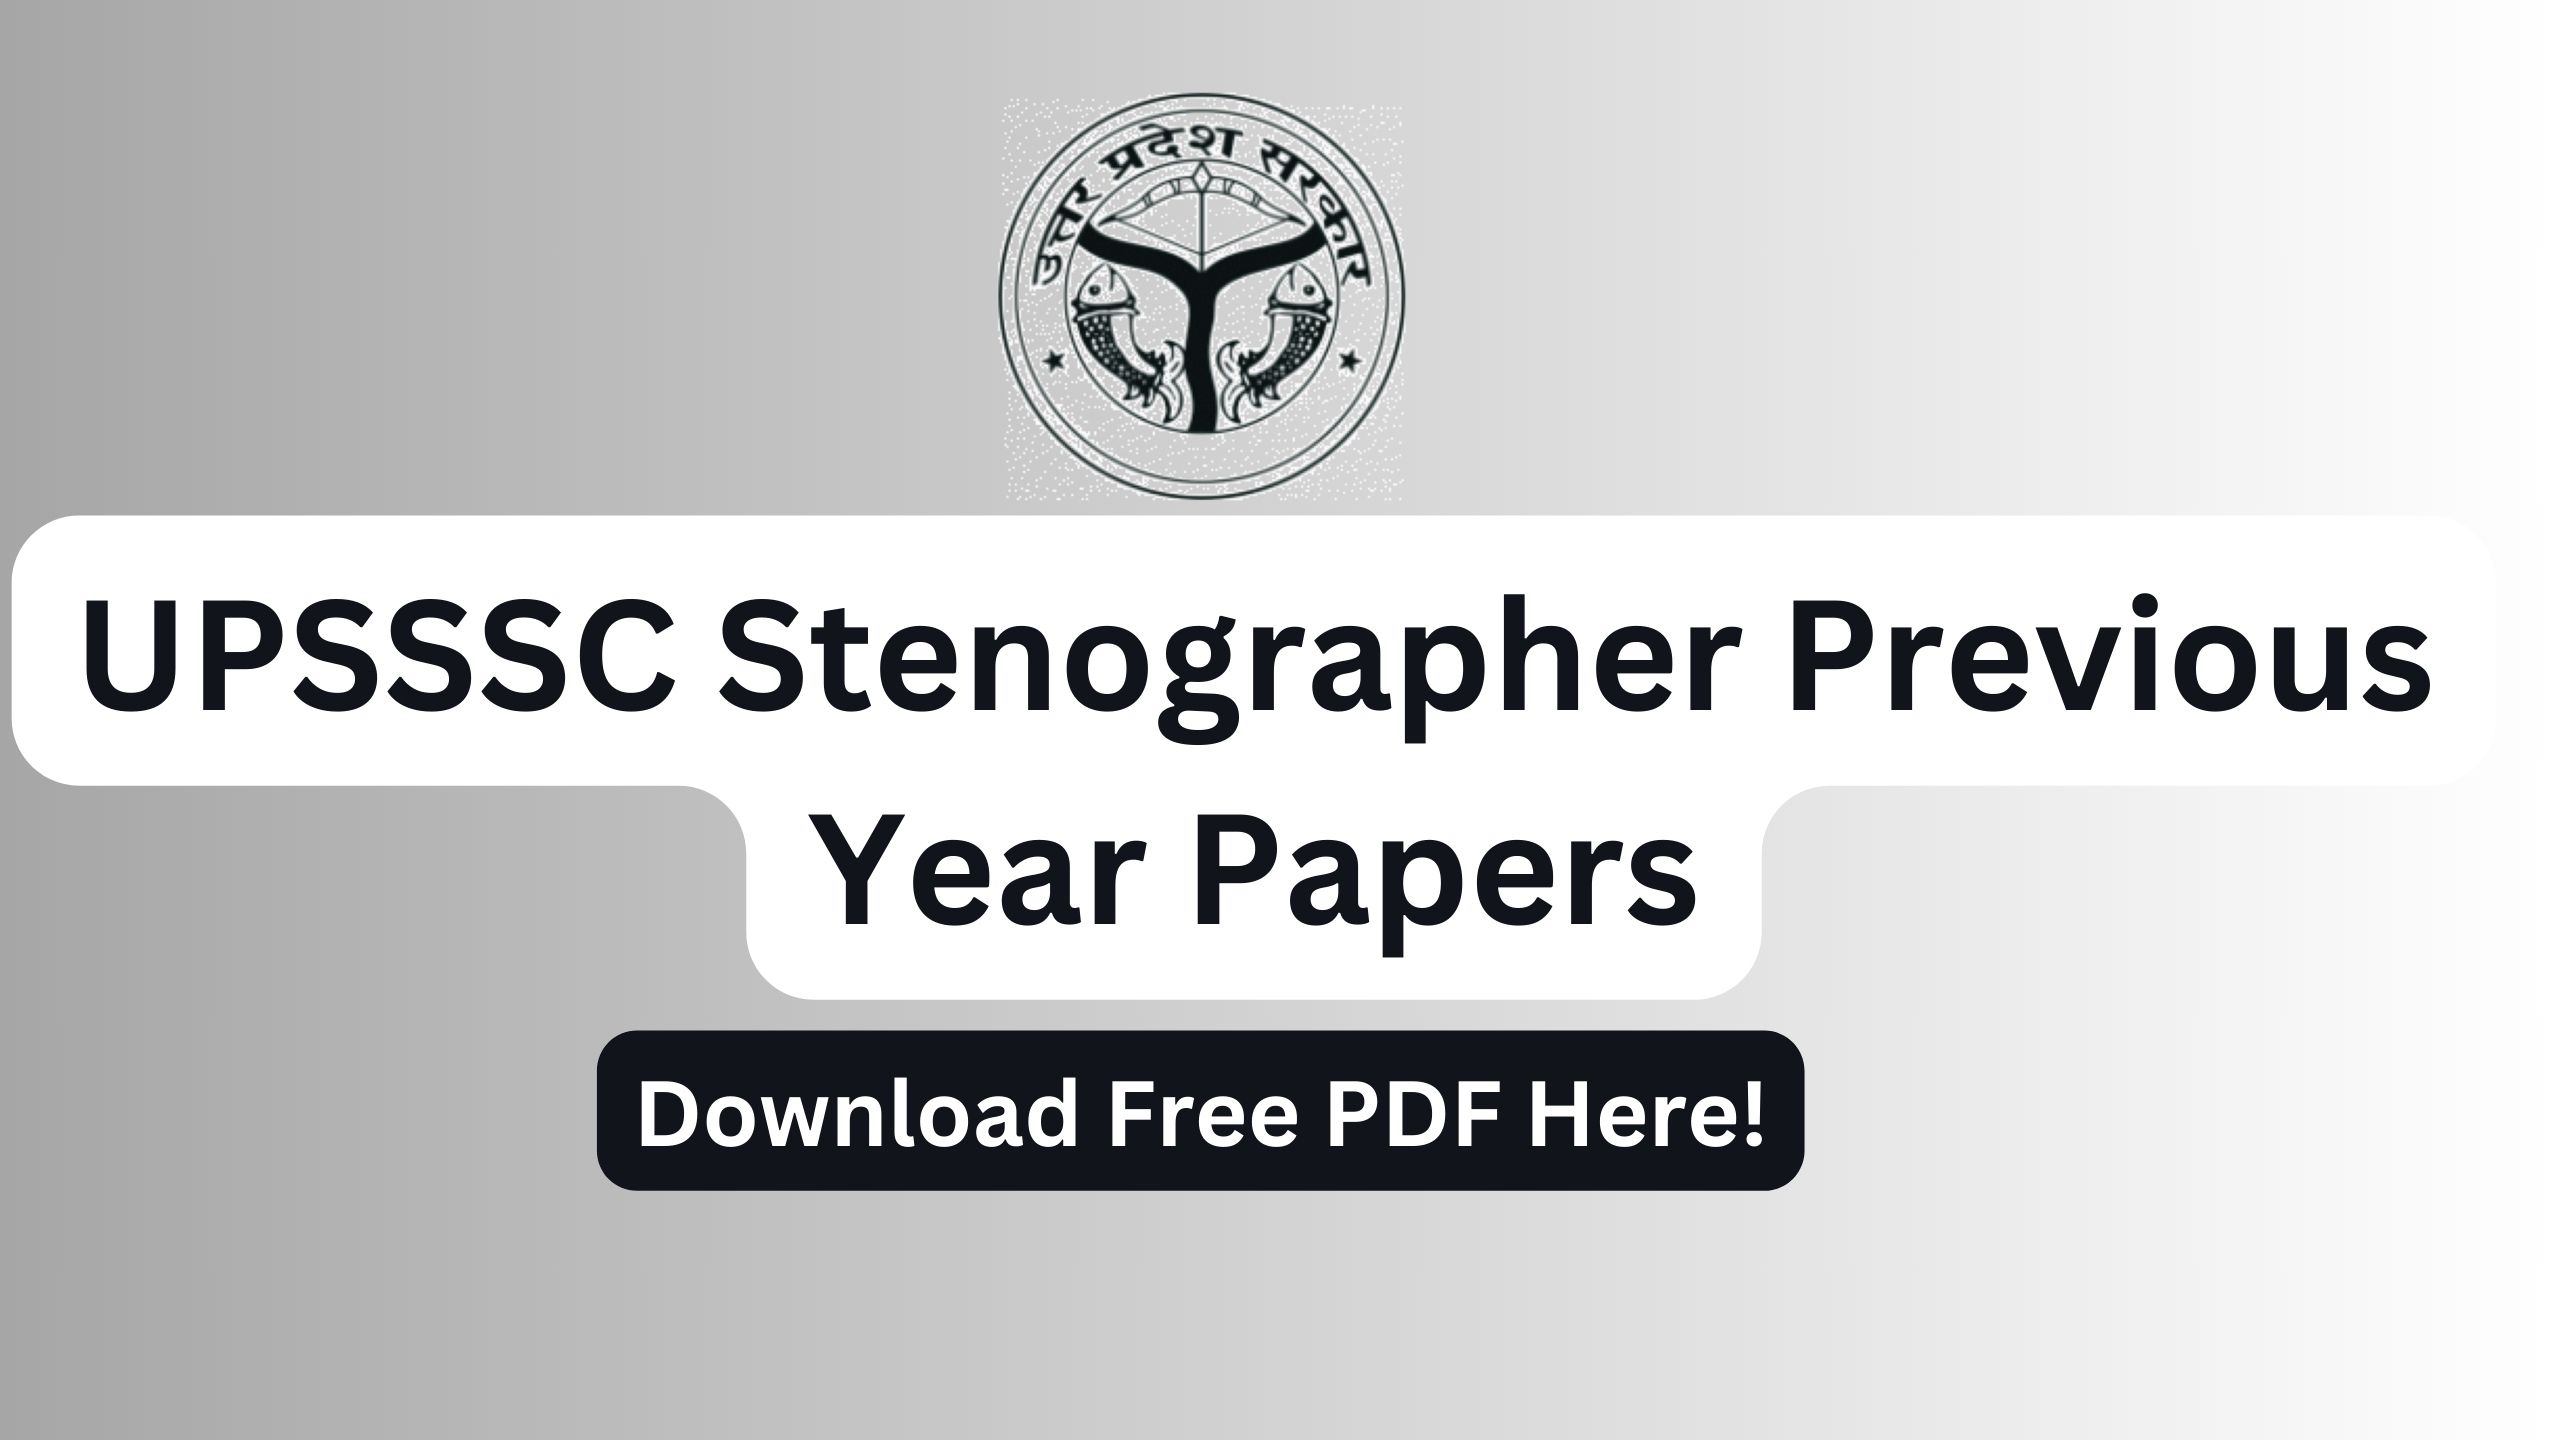 UPSSSC Stenographer Previous Year Papers